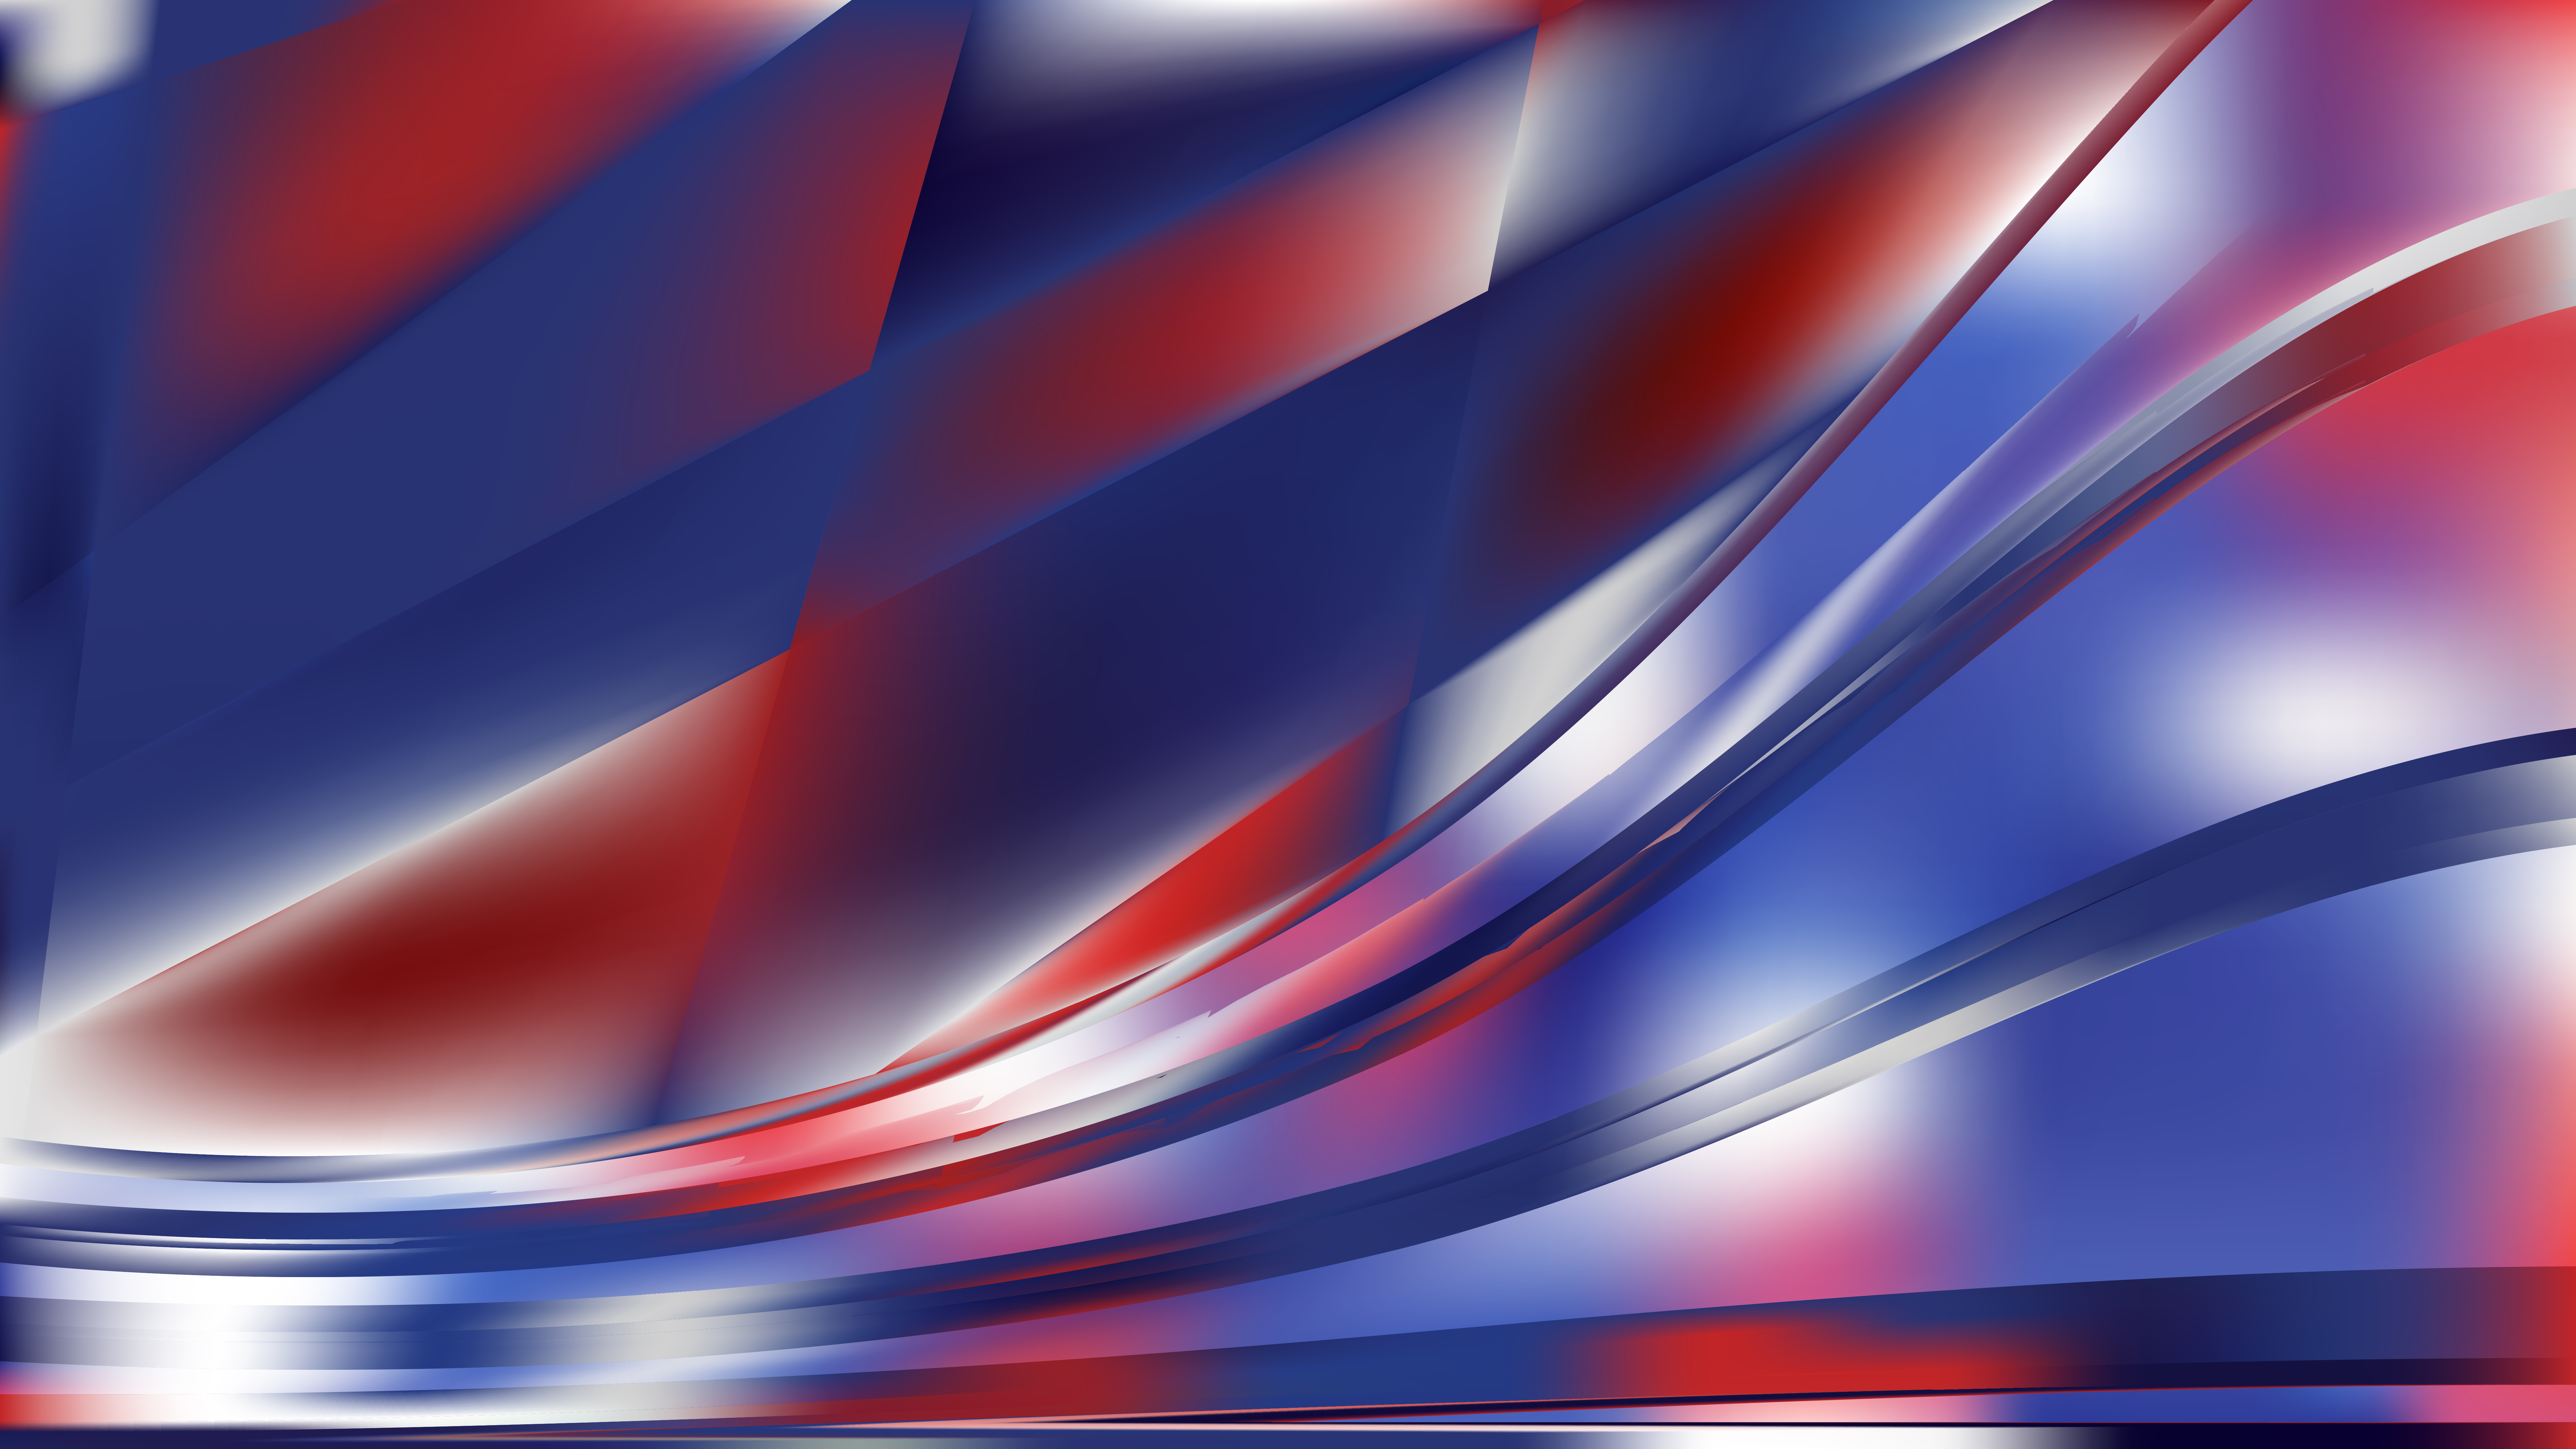 Free Red White And Blue Background Graphic